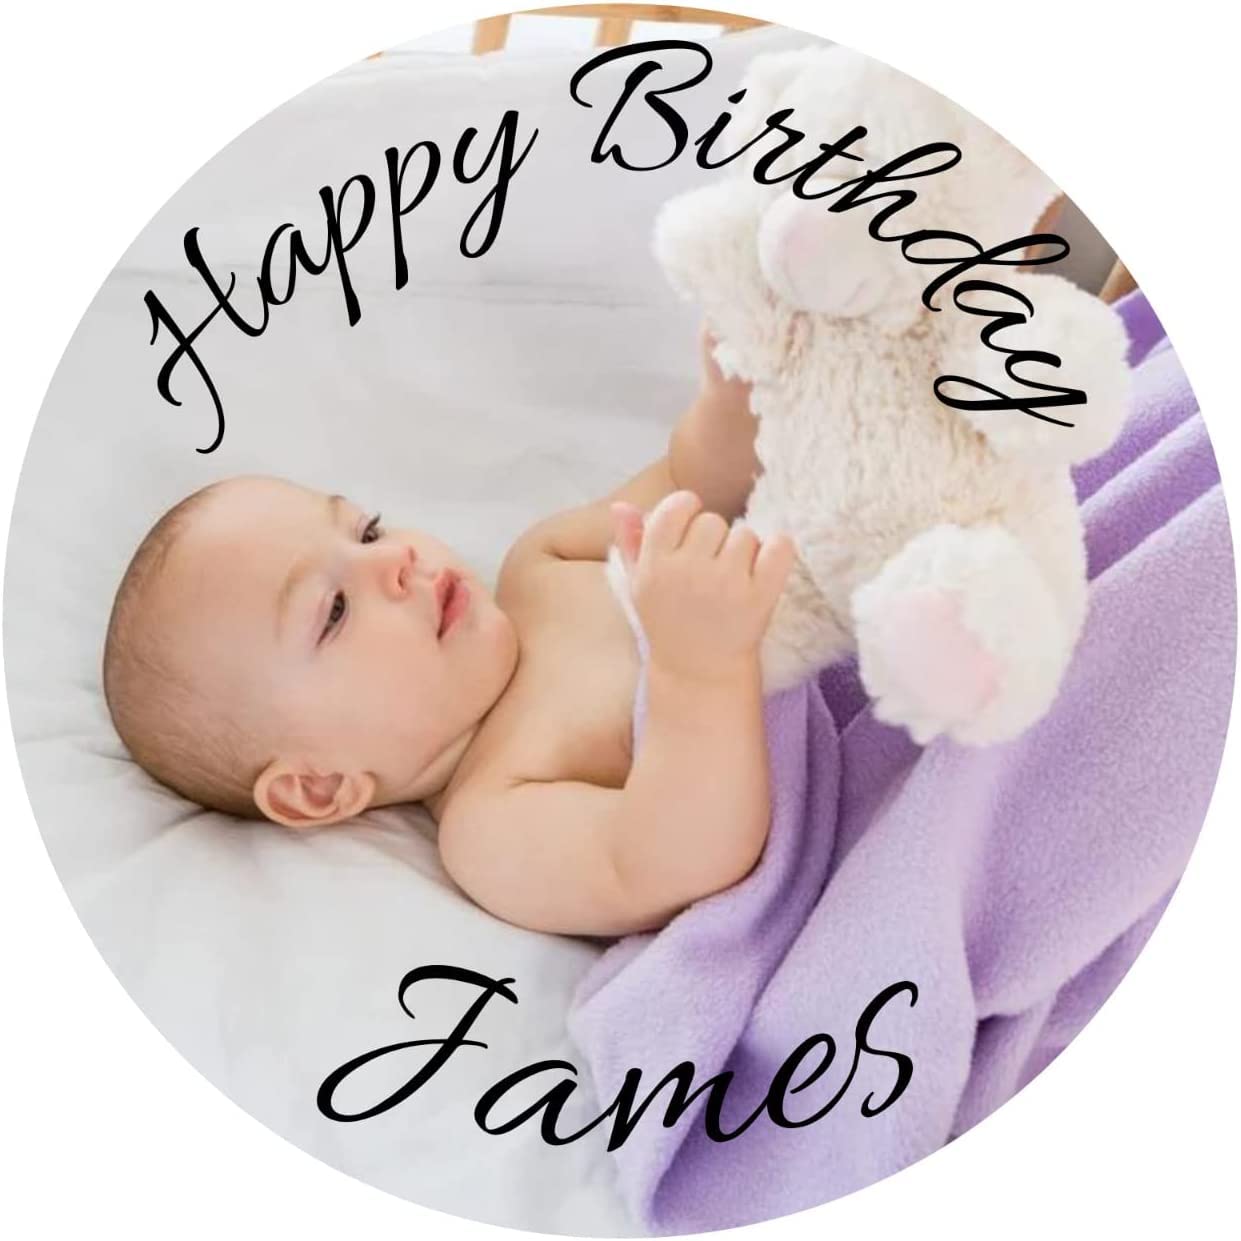 Edible Icing Cake Topper, Personalised Happy Birthday Image Toppers with Custom Text